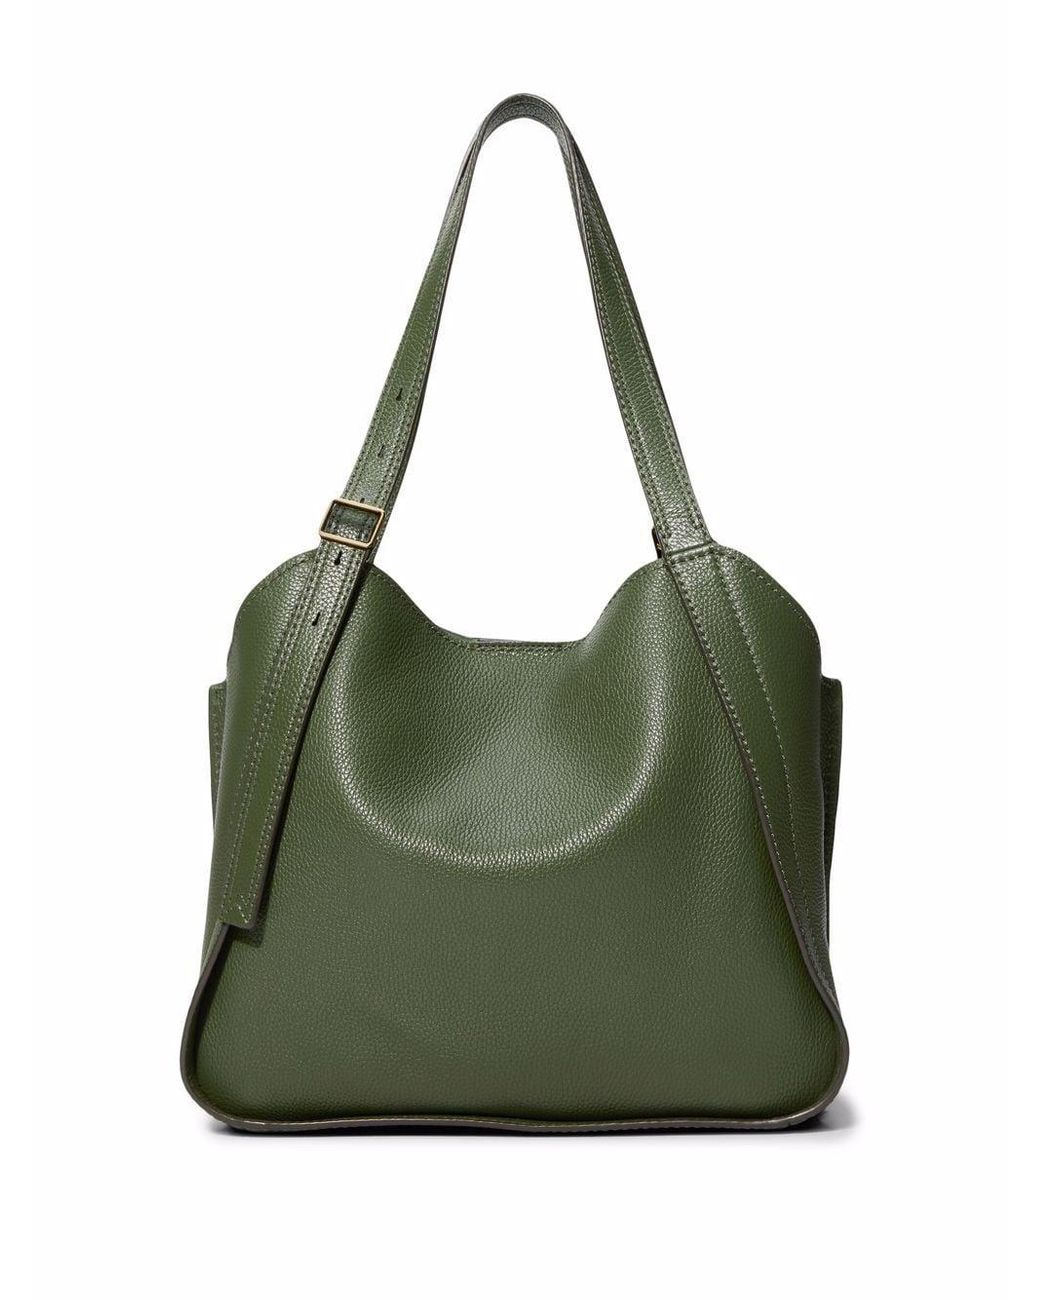 Marc Jacobs The Director Leather Tote Bag in Green | Lyst